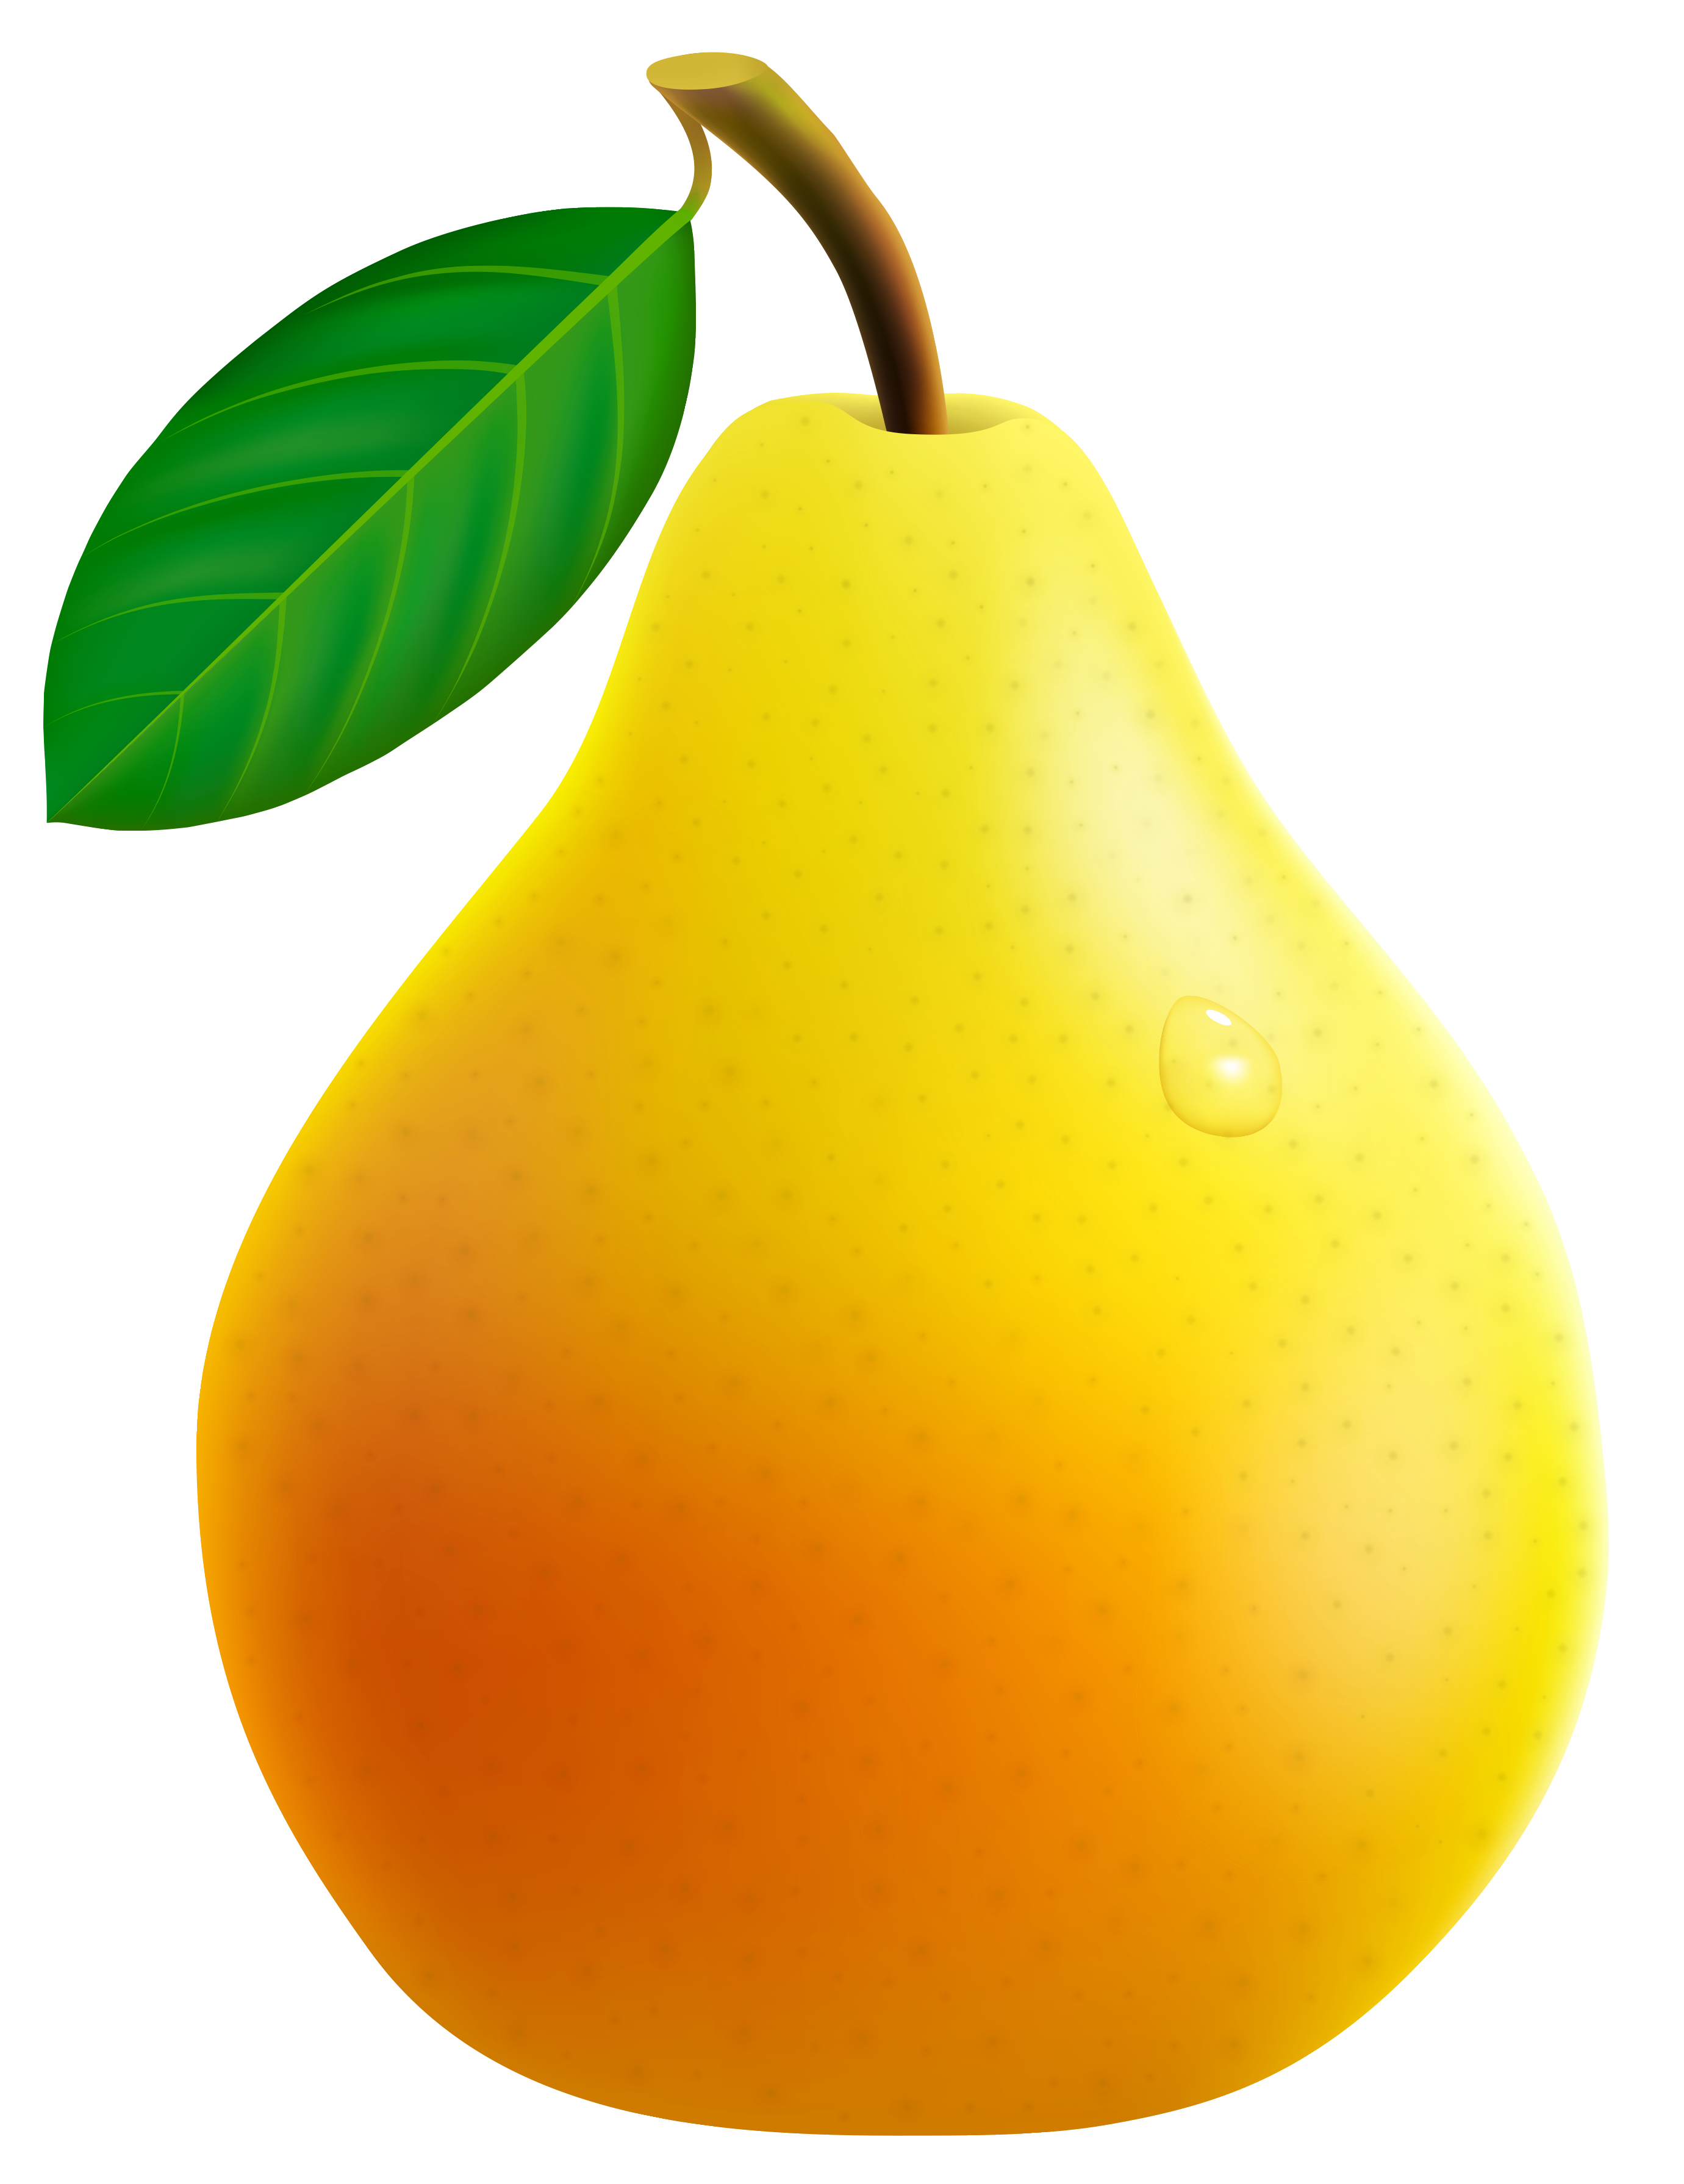 Yellow Pear PNG Vector Clipart Image | Gallery Yopriceville - High ...